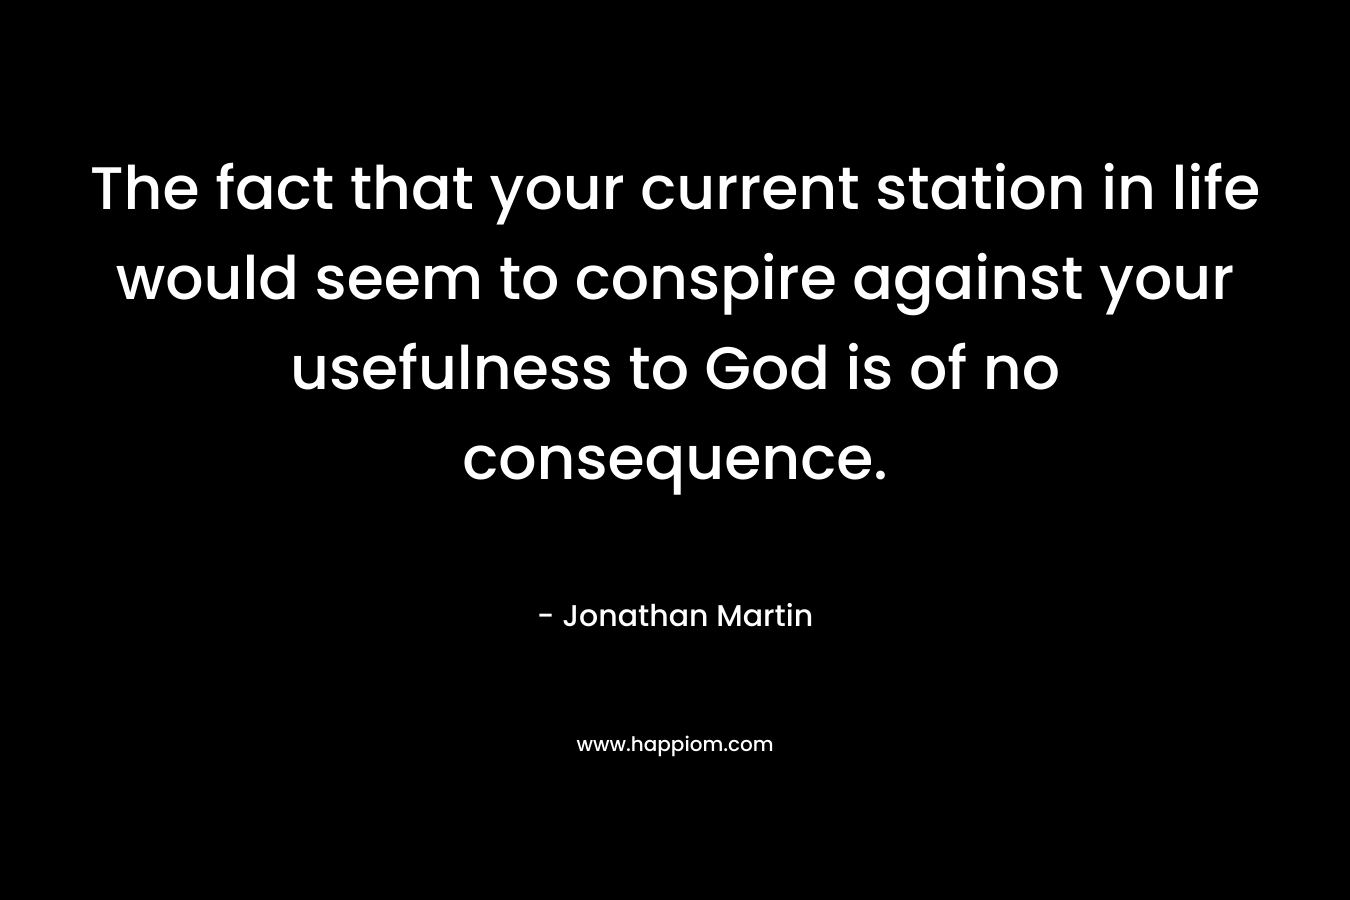 The fact that your current station in life would seem to conspire against your usefulness to God is of no consequence.